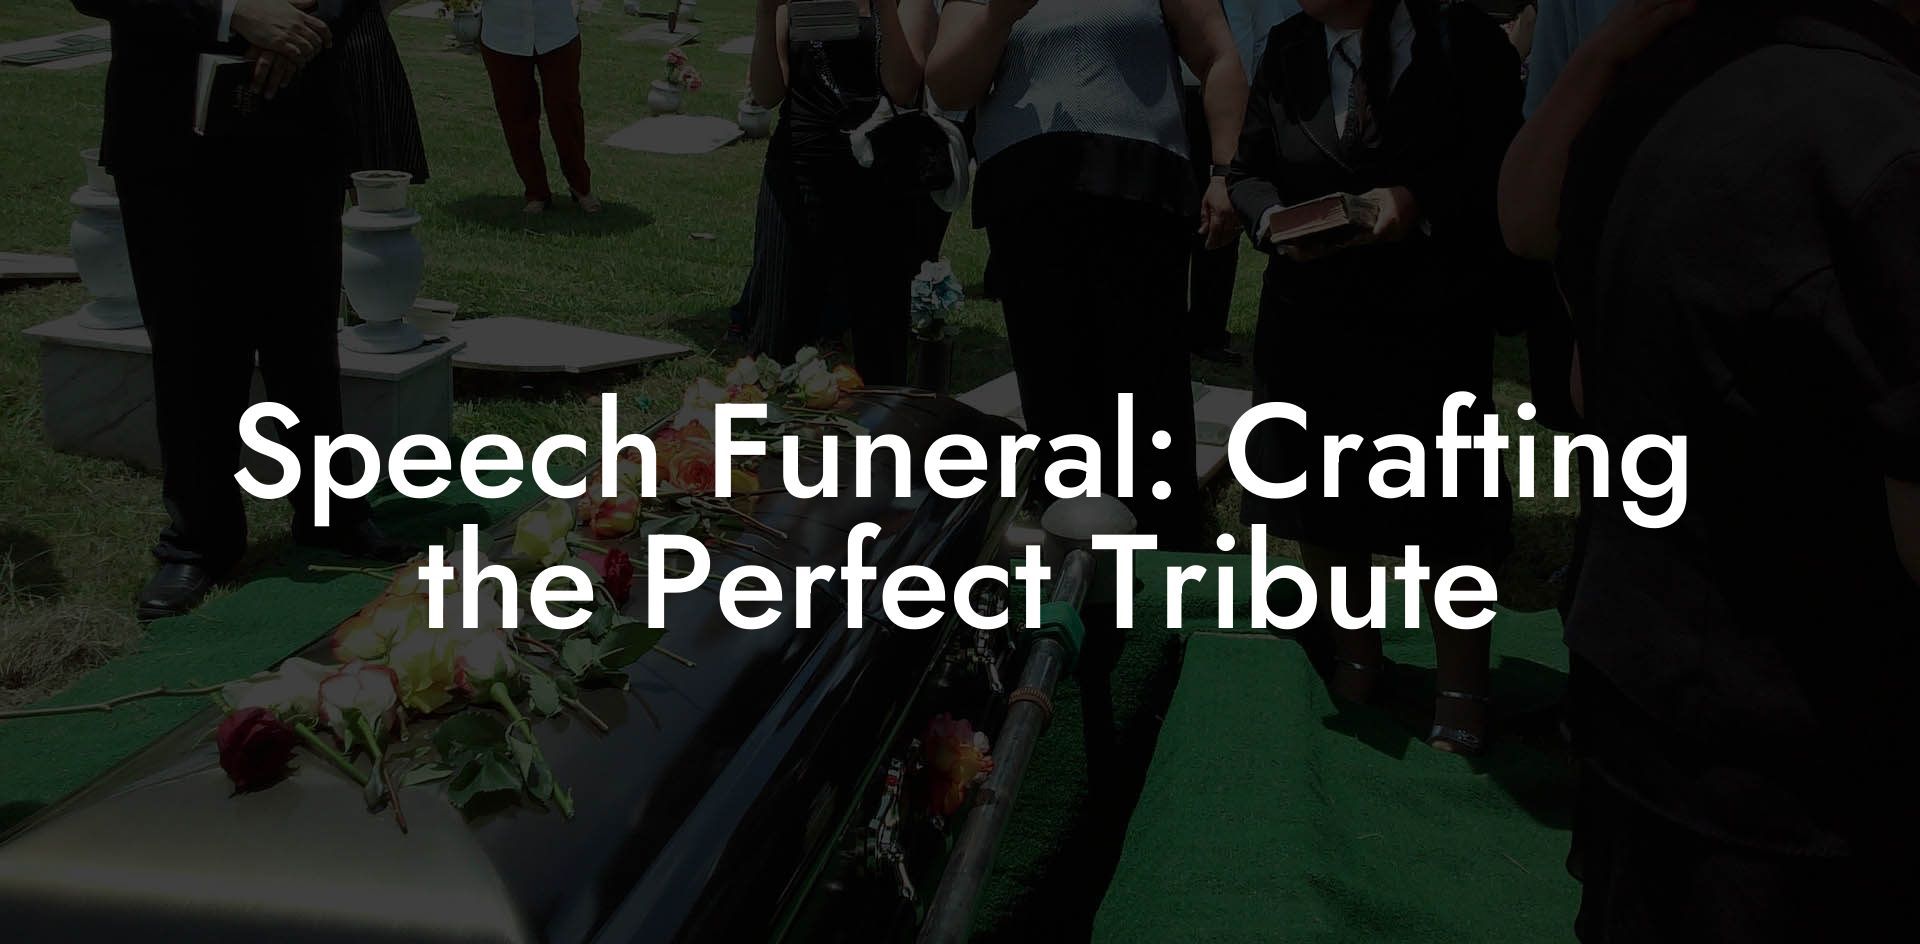 Speech Funeral: Crafting the Perfect Tribute